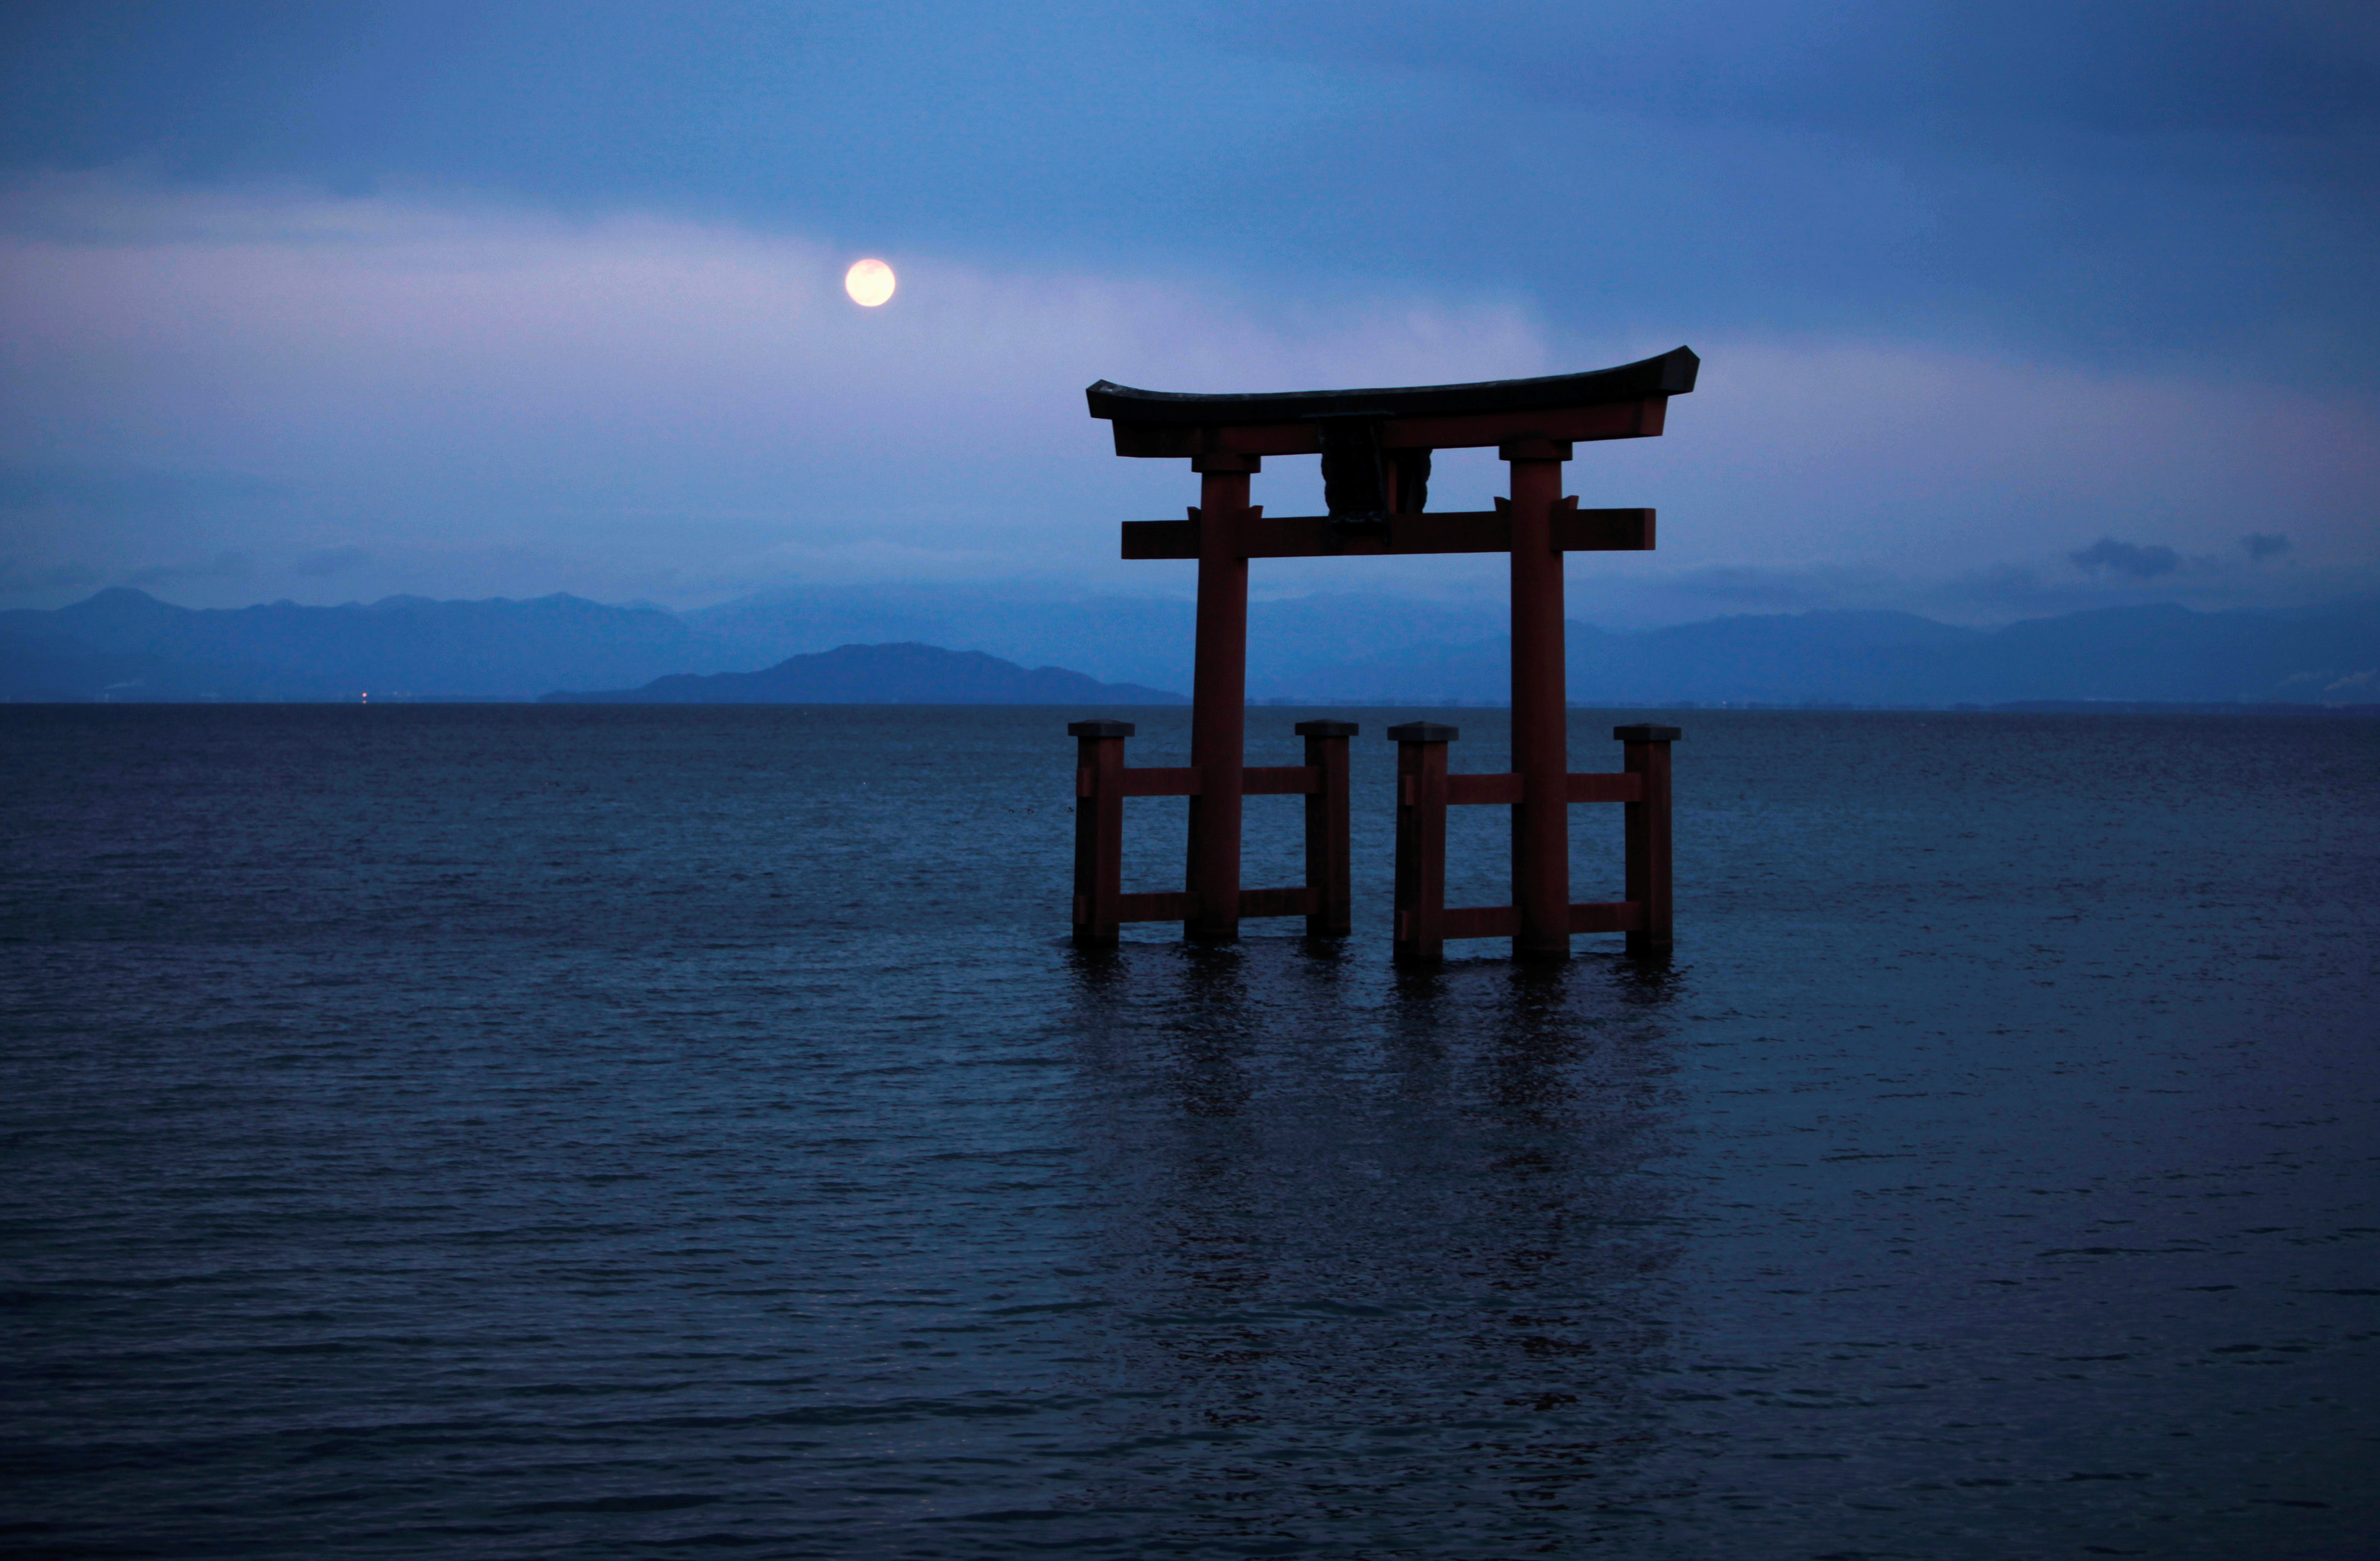 A Shinto shrine gate, with the moon behind it, is seen amidst Japan's largest lake, Lake Biwa, in Takashima, Shiga prefecture